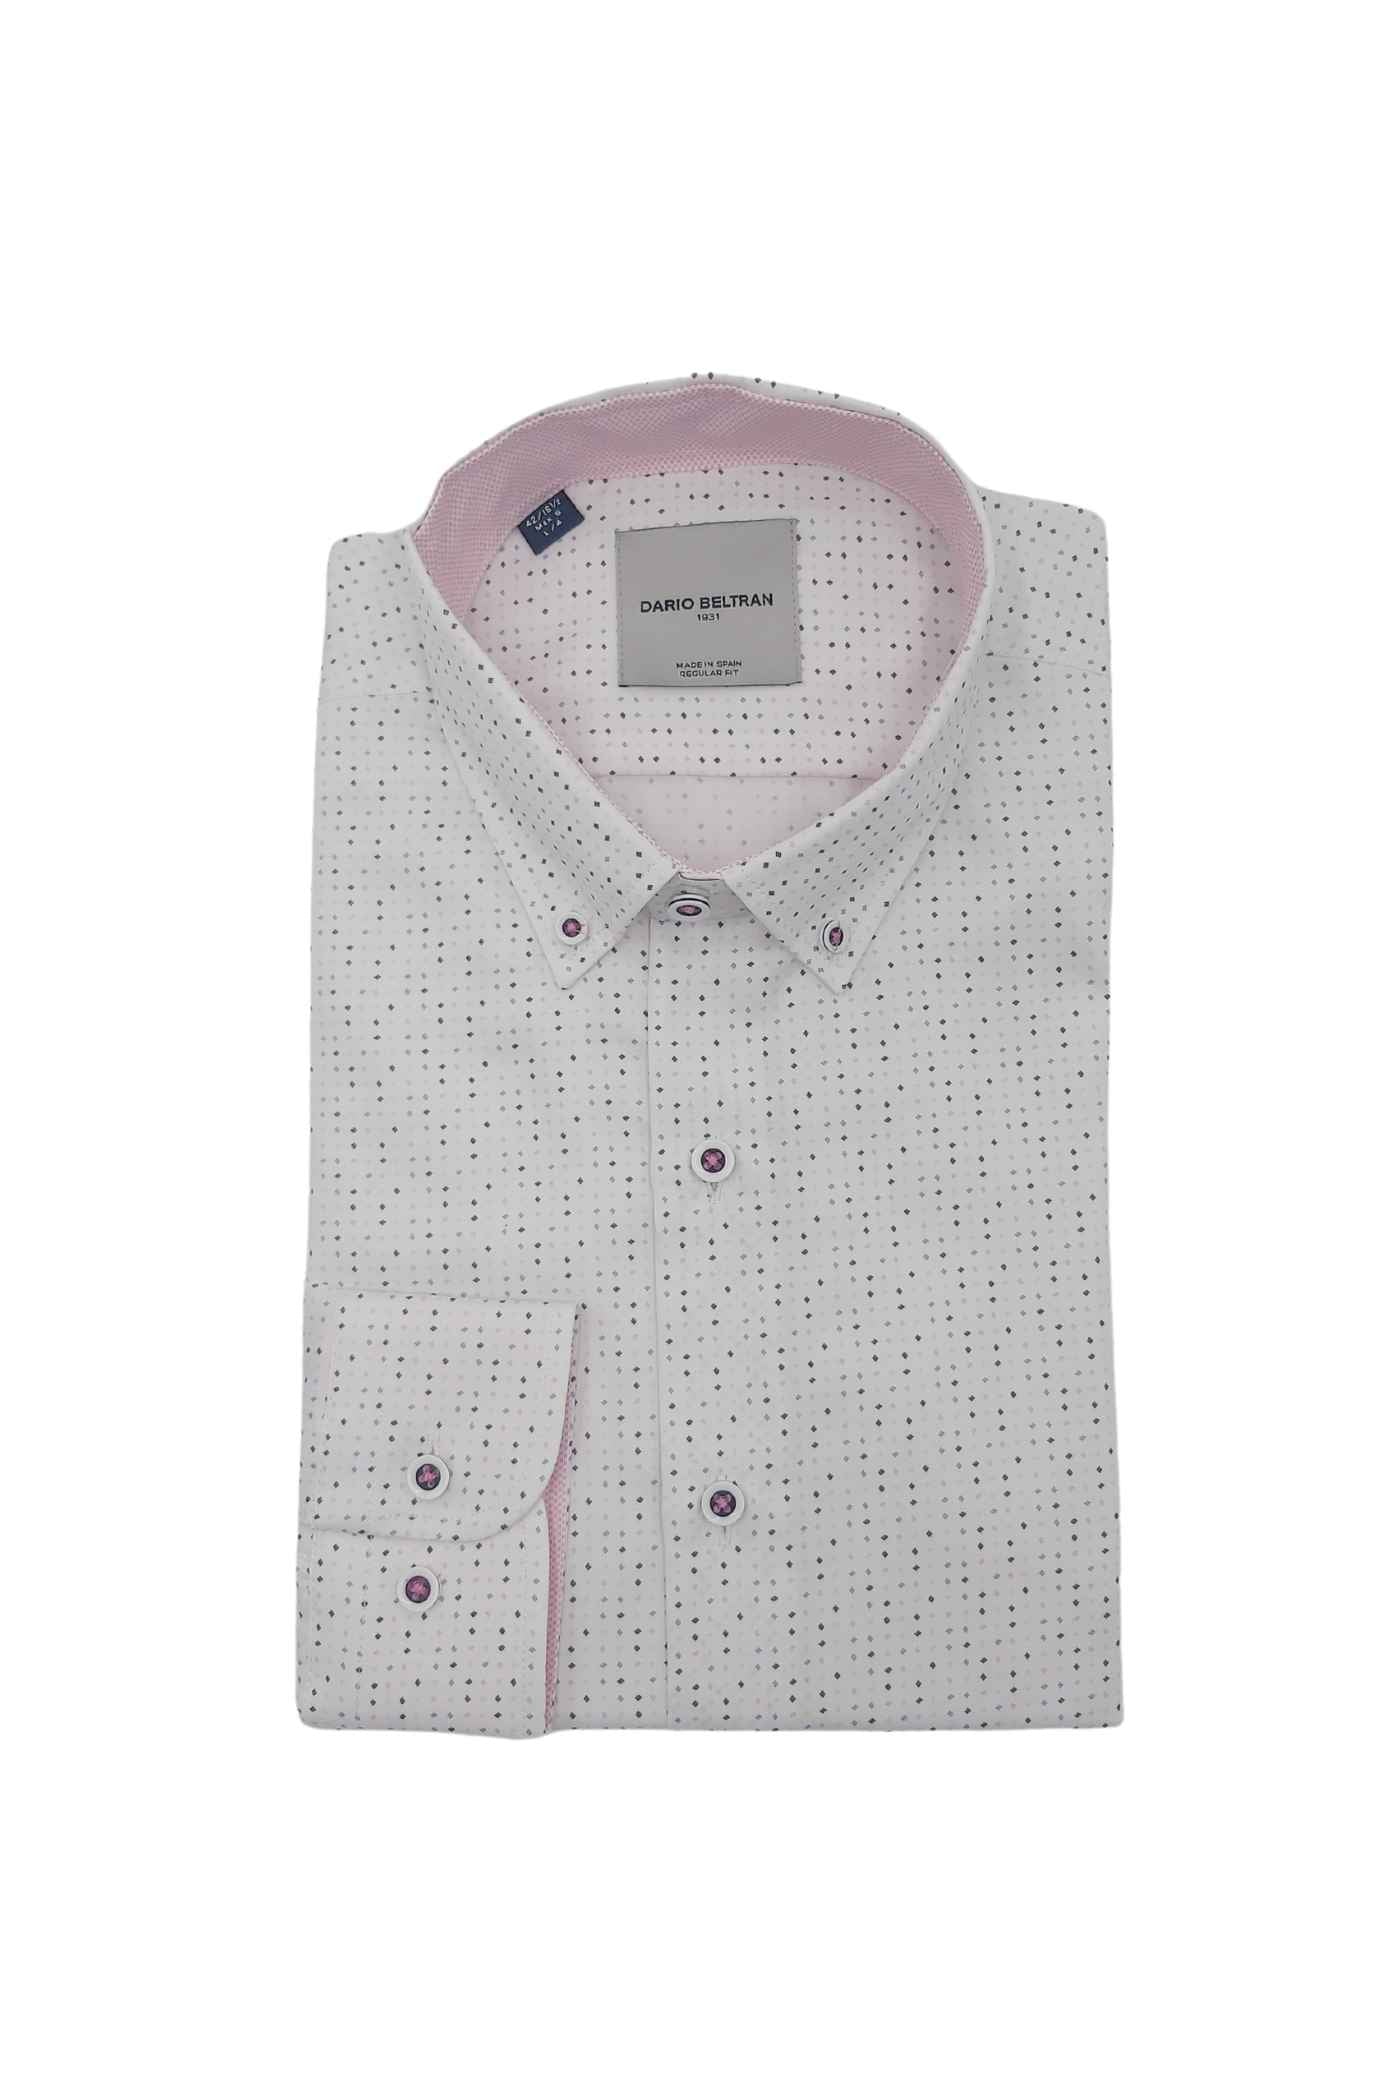 Men's Ager White/Navy/Pink Dot Pattern Shirt-Front View